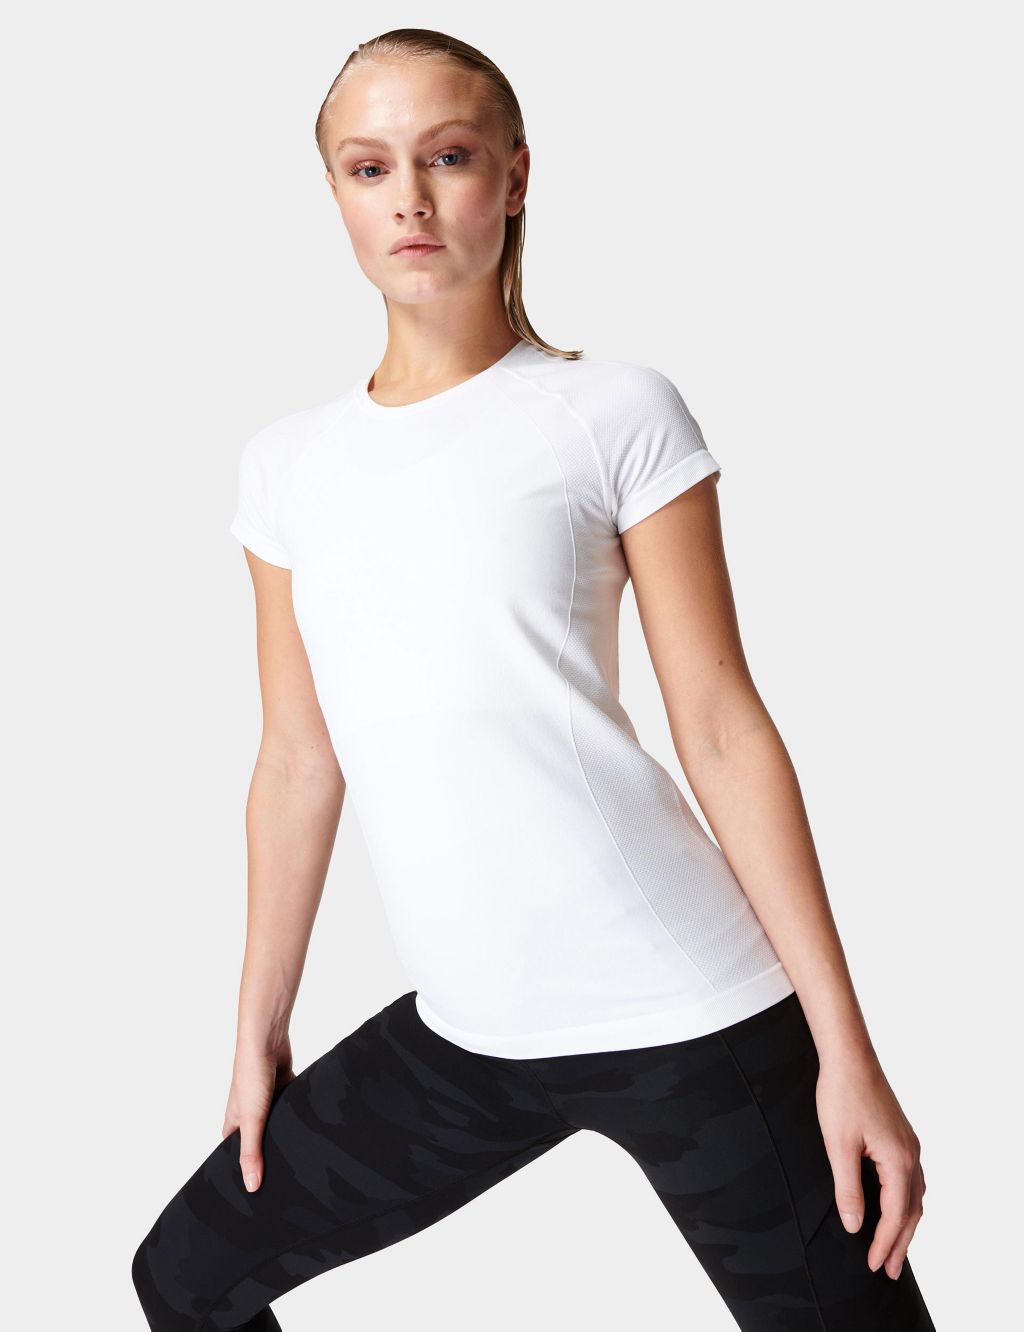 Athlete Seamless Fitted T-Shirt image 1